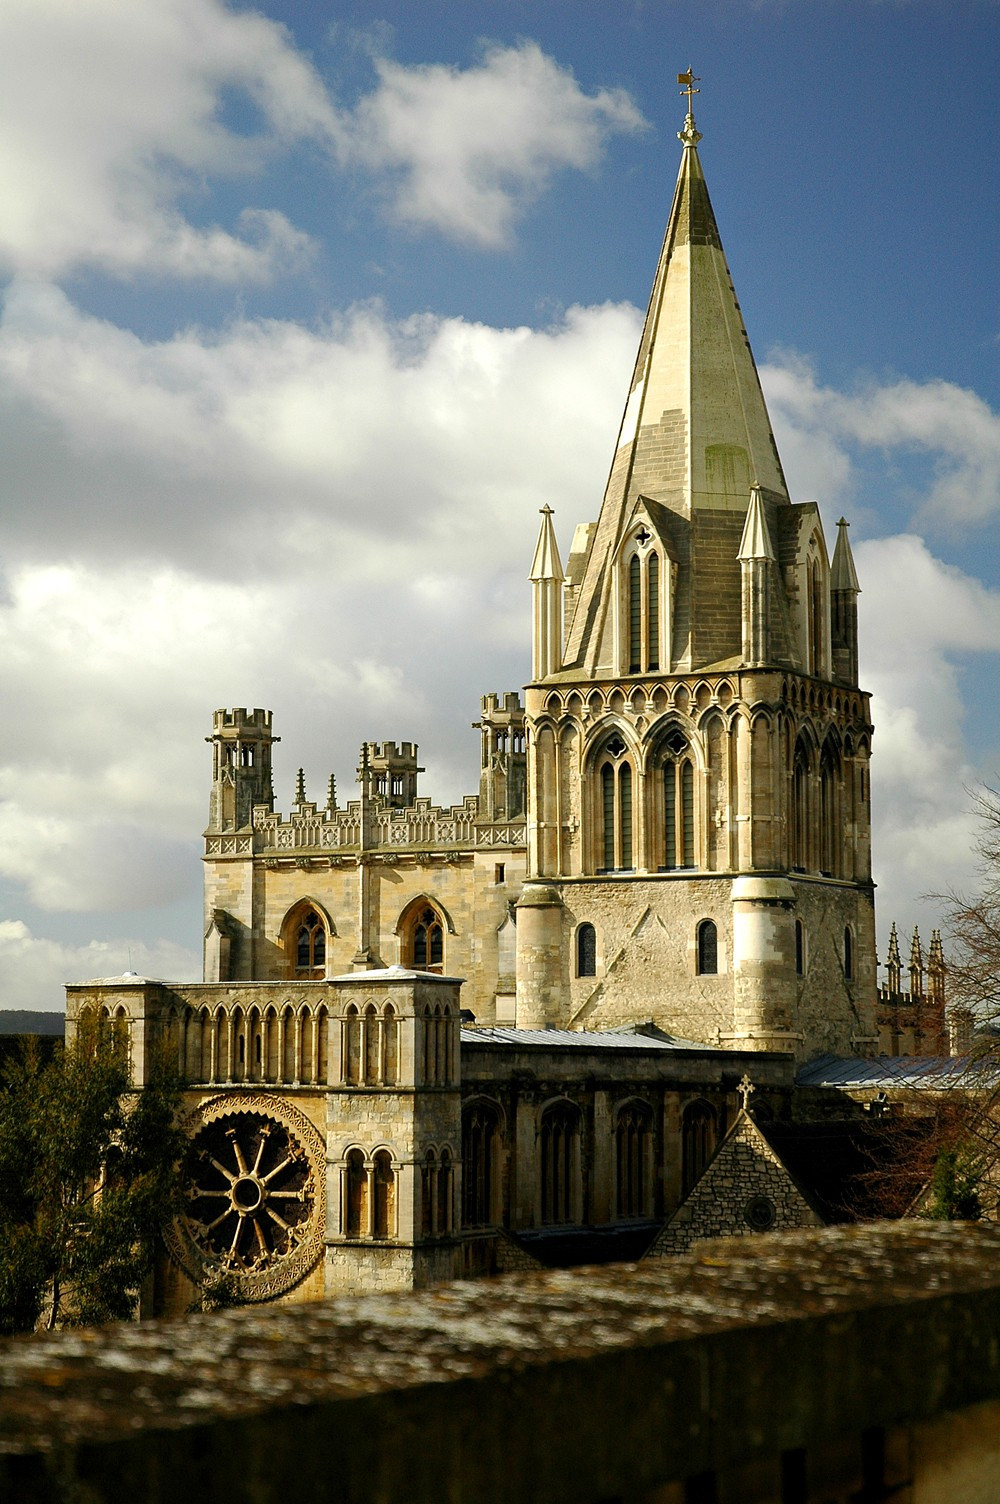 https://commons.wikimedia.org/wiki/File:Cathedral_oxford.jpg